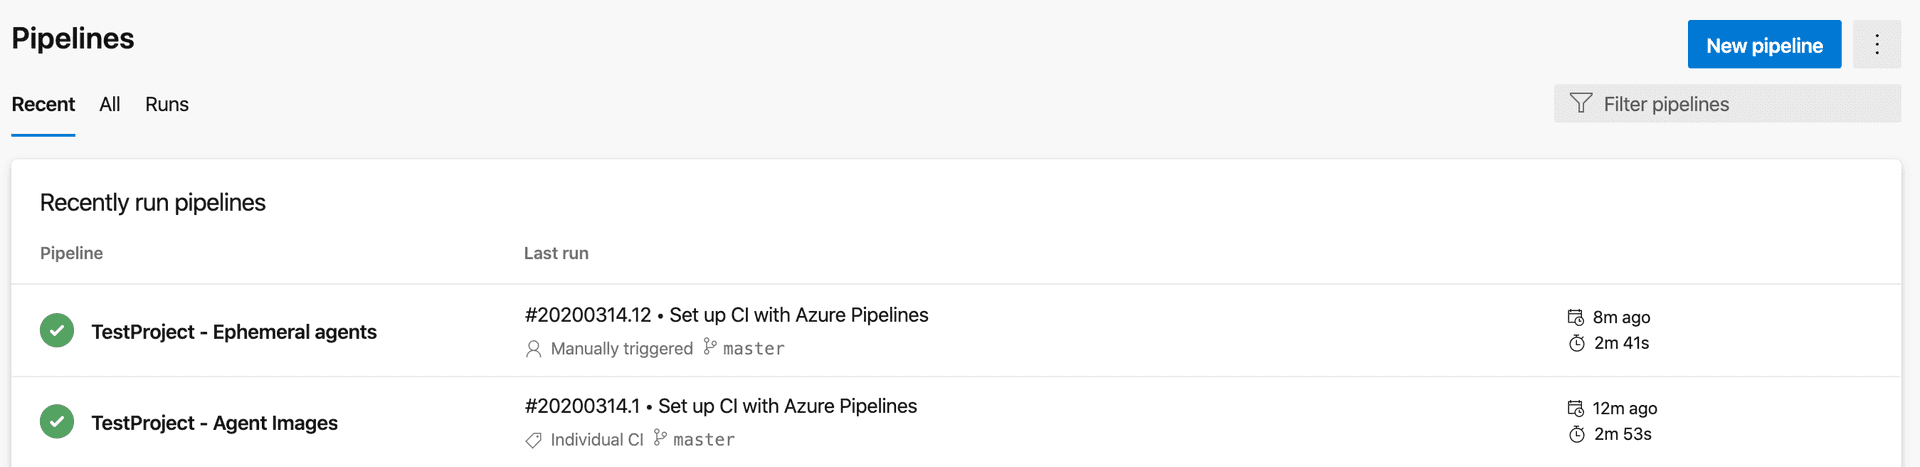 Two main pipelines defined